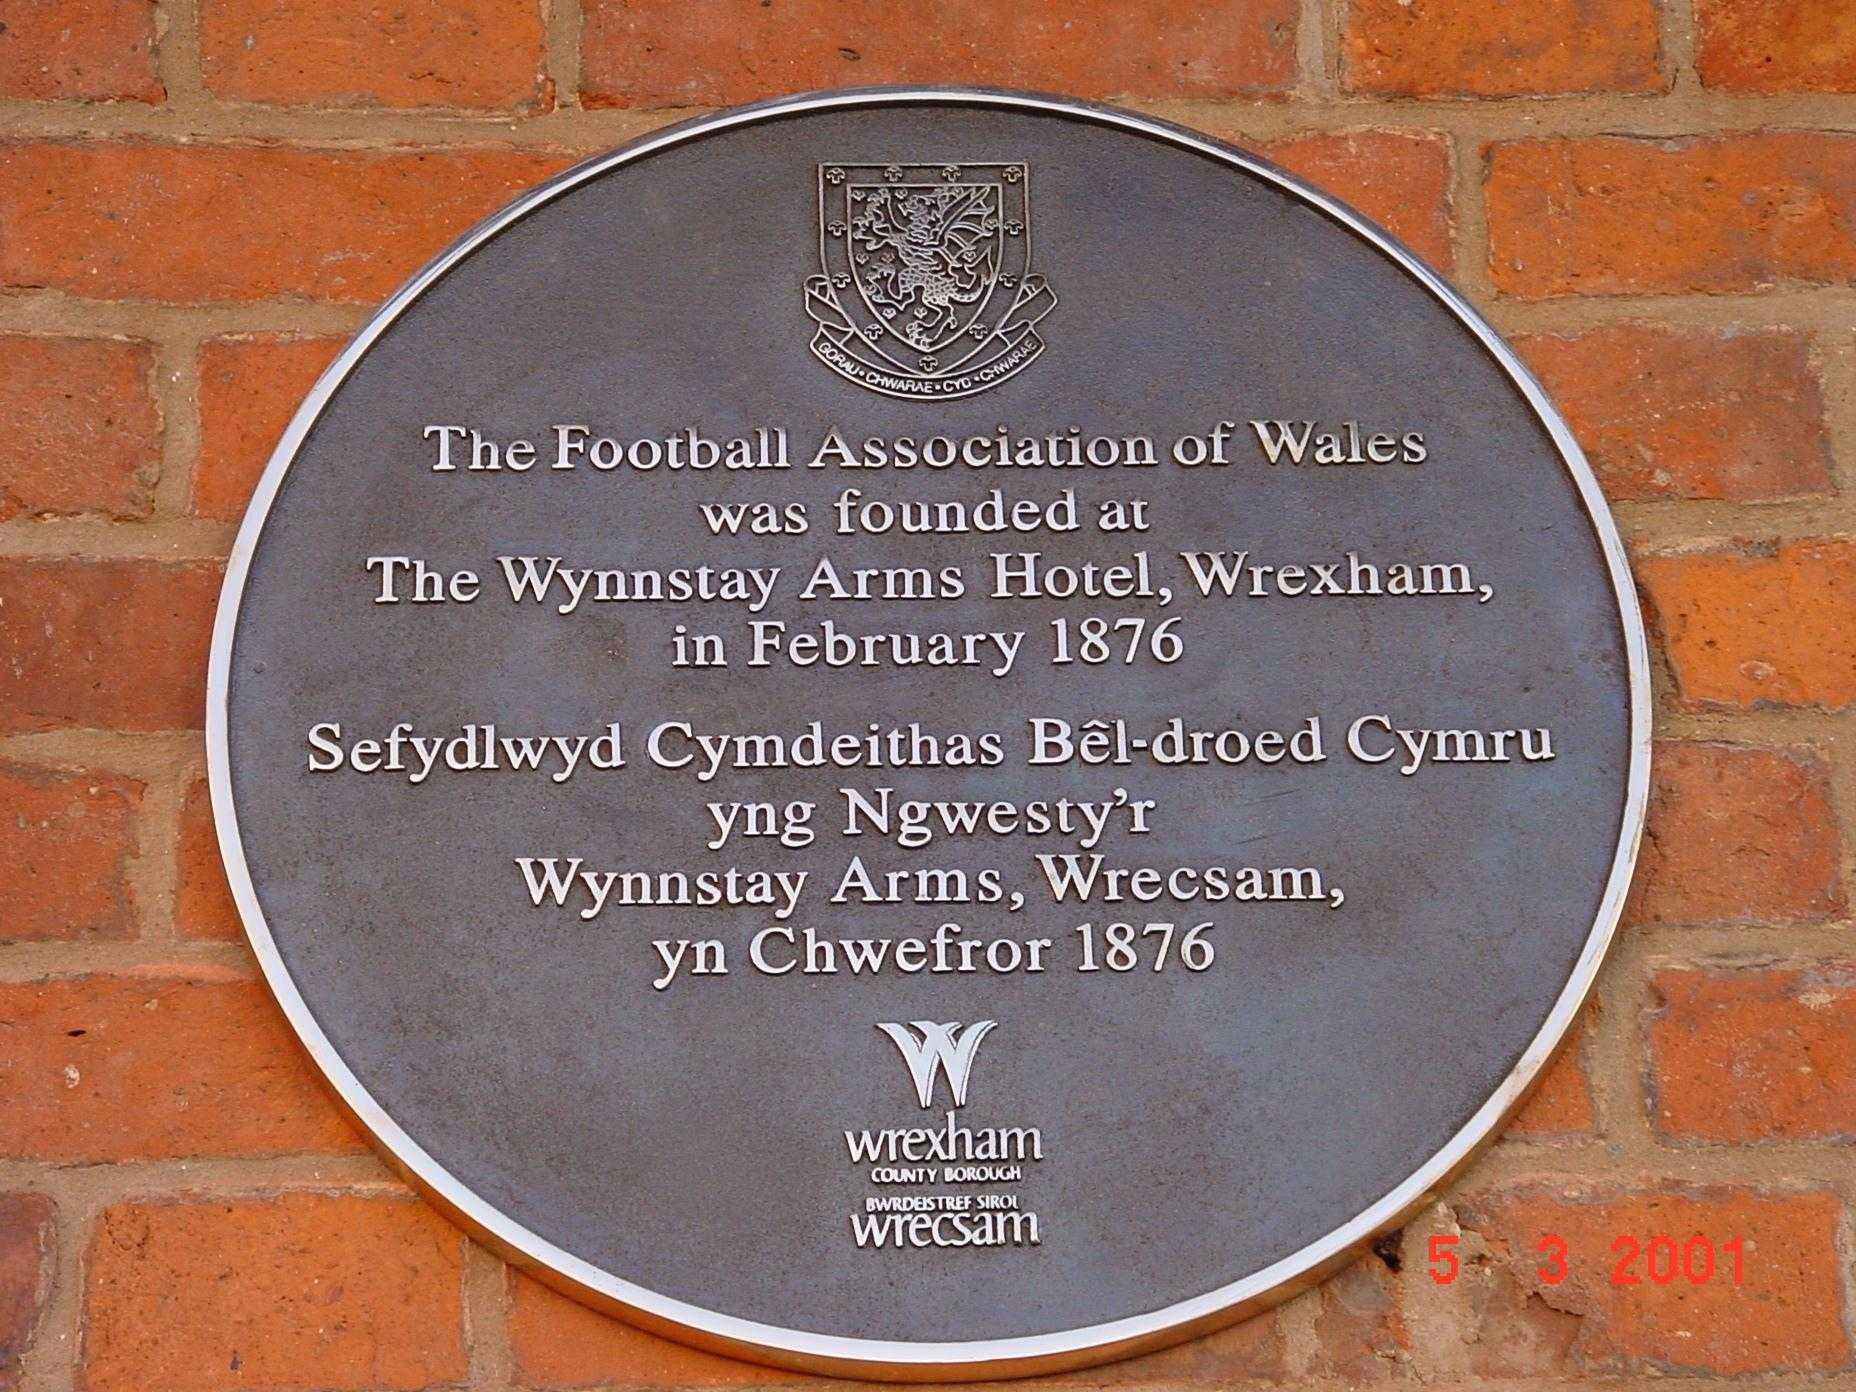 Amgueddfa Bêl-droed Cymru / Football Museum Wales on X: "On this day: 146 years ago on 2 February 1876, the first meeting of the @FAWales took place at the Wynnstay Arms Hotel